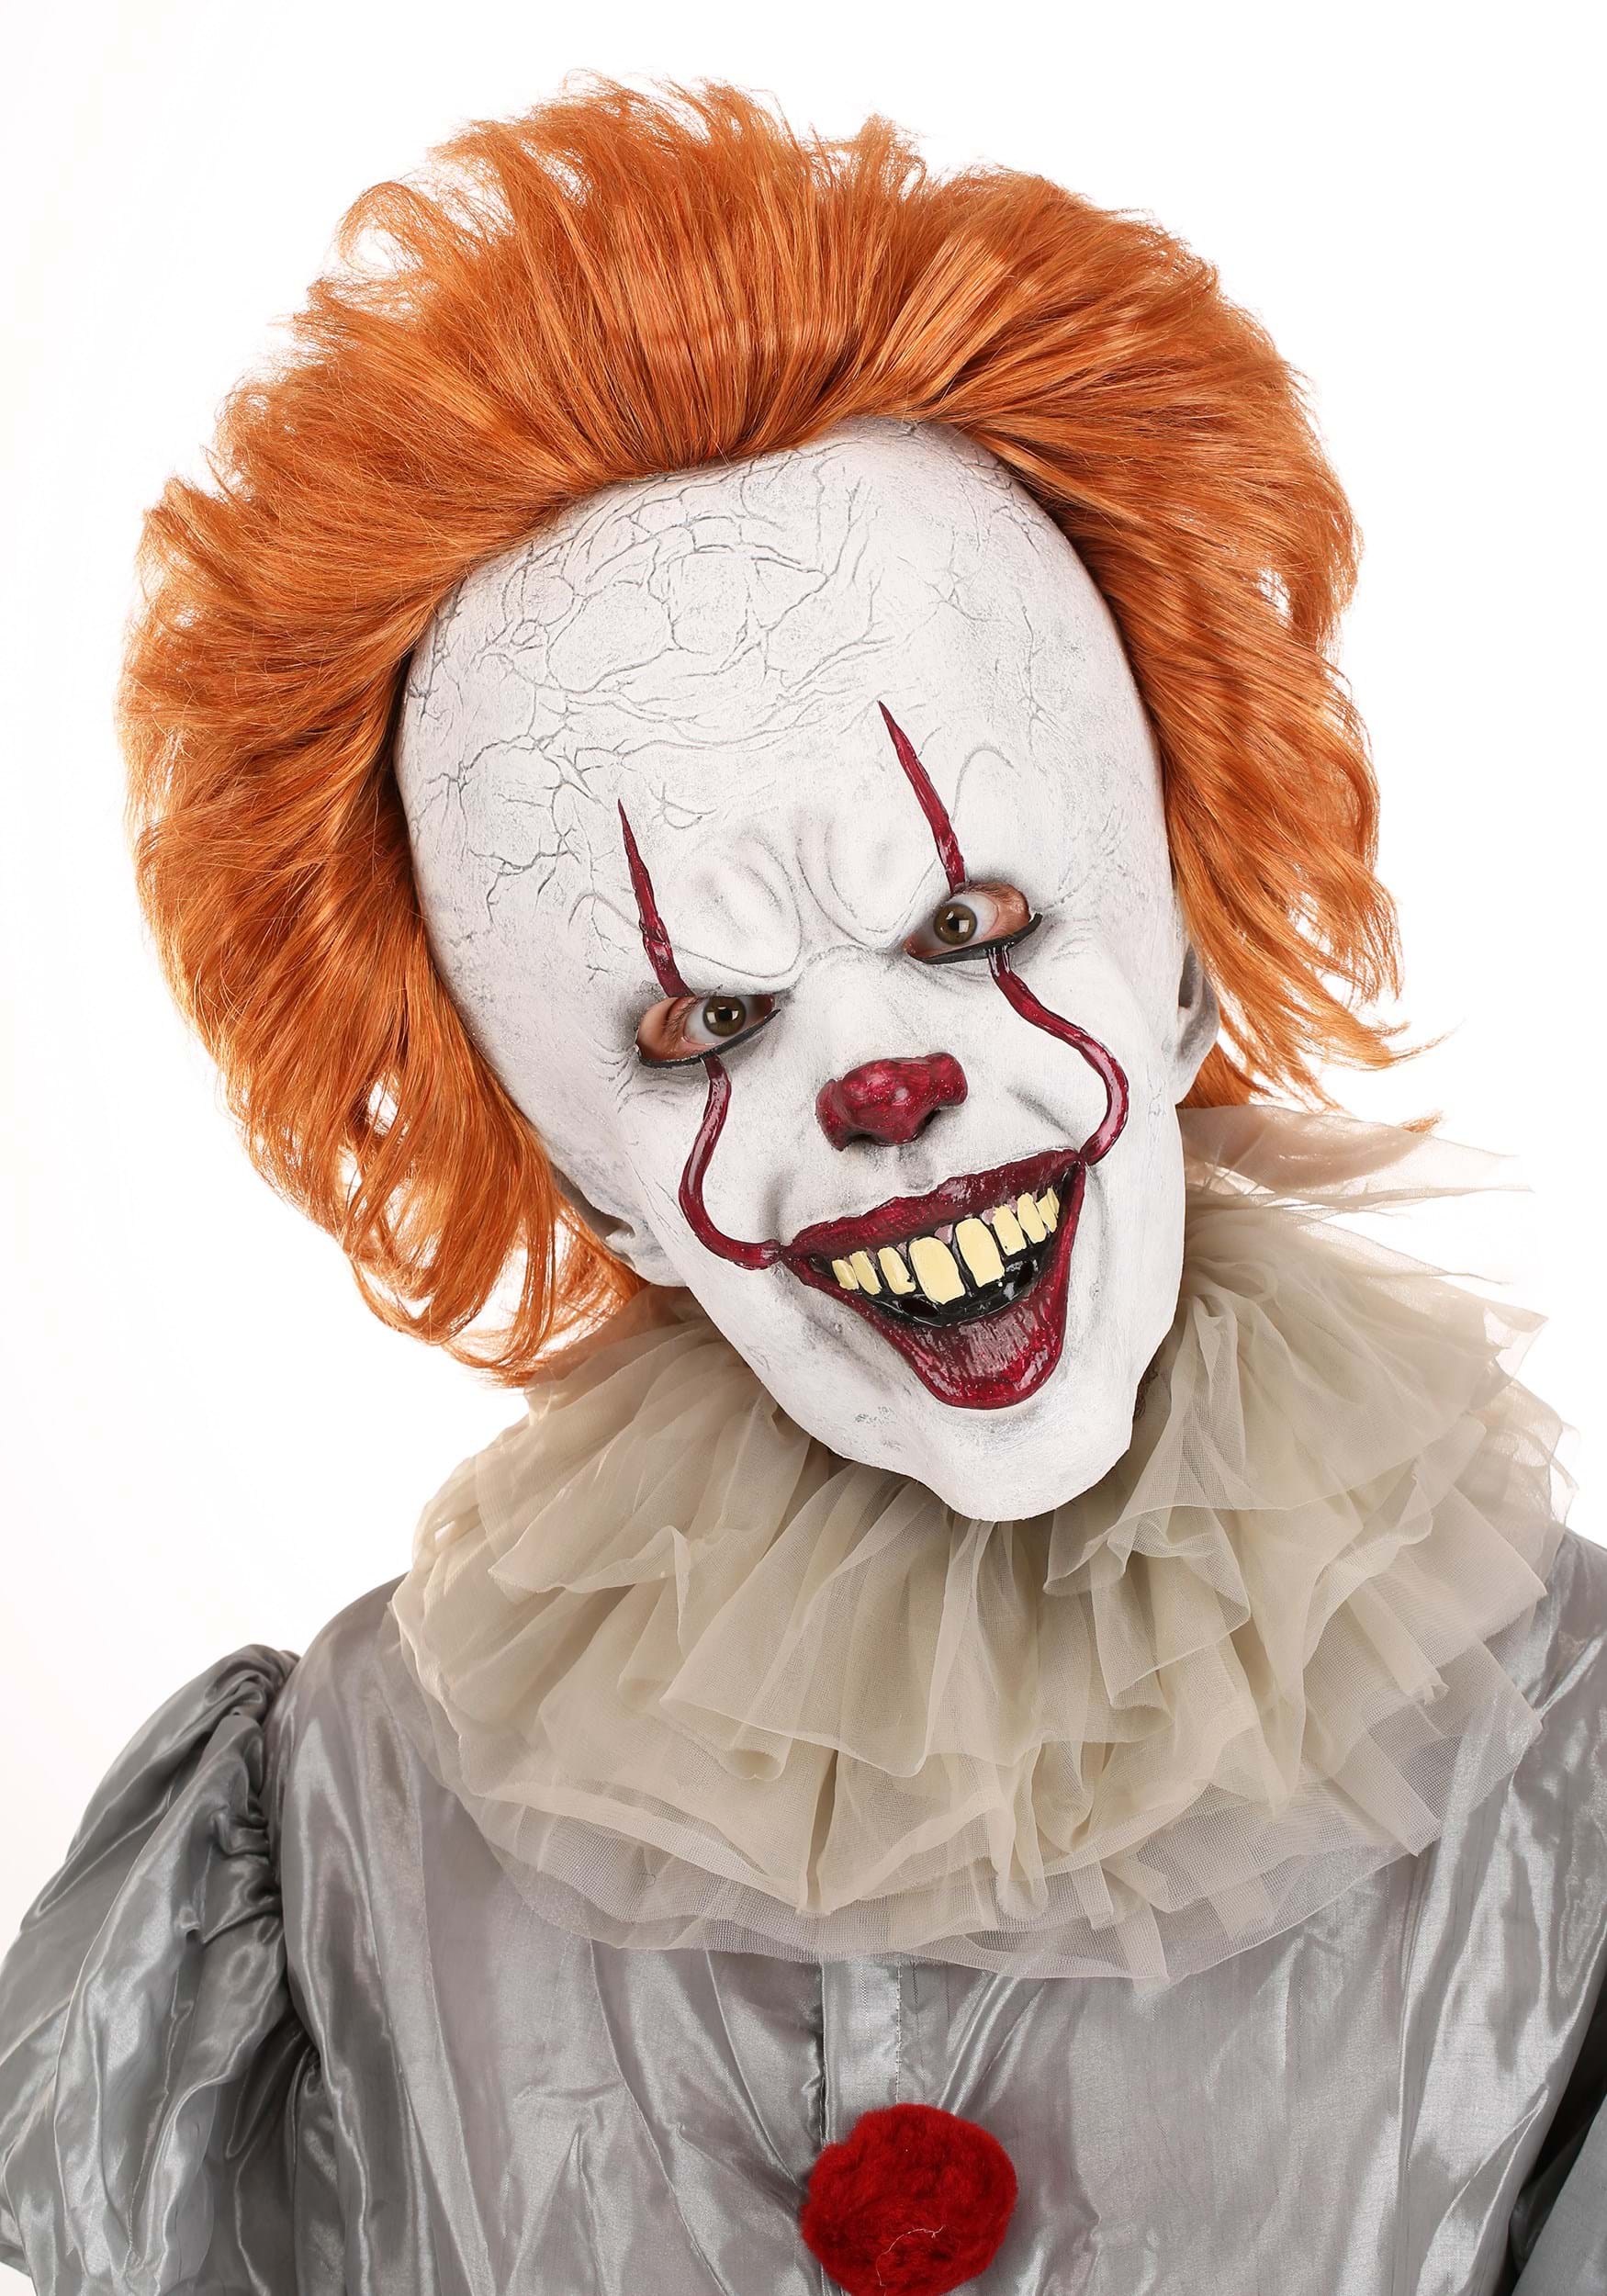 Annual extract Turkey Grand Heritage Pennywise Movie Costume for Men